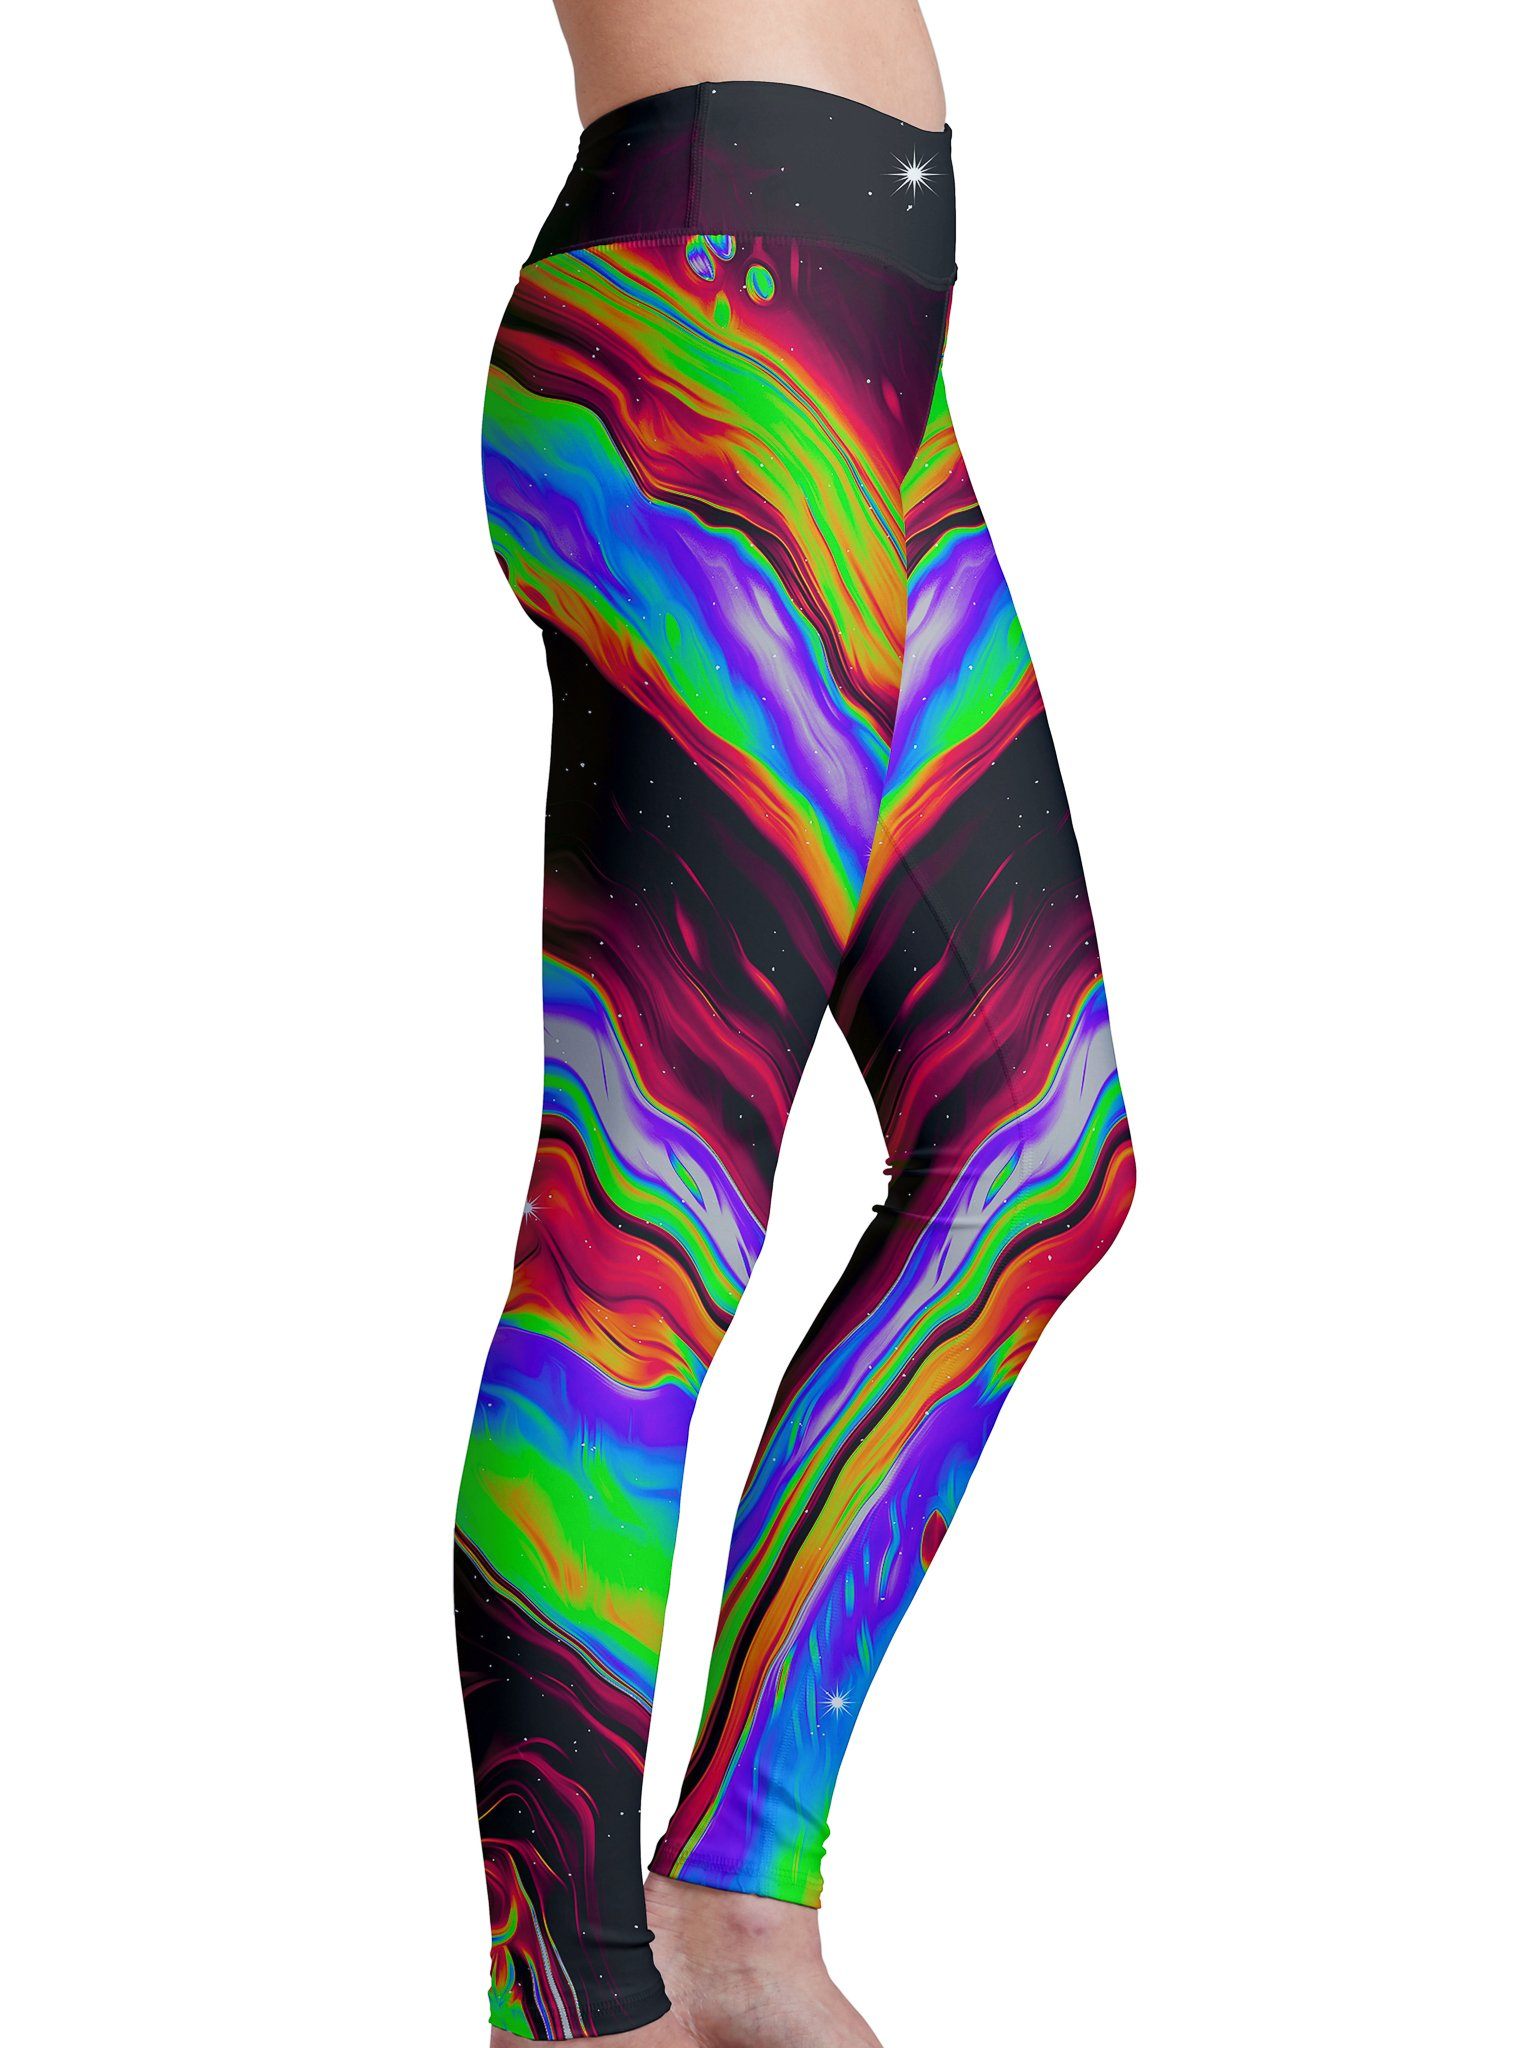 Neon Tights - Electro Threads